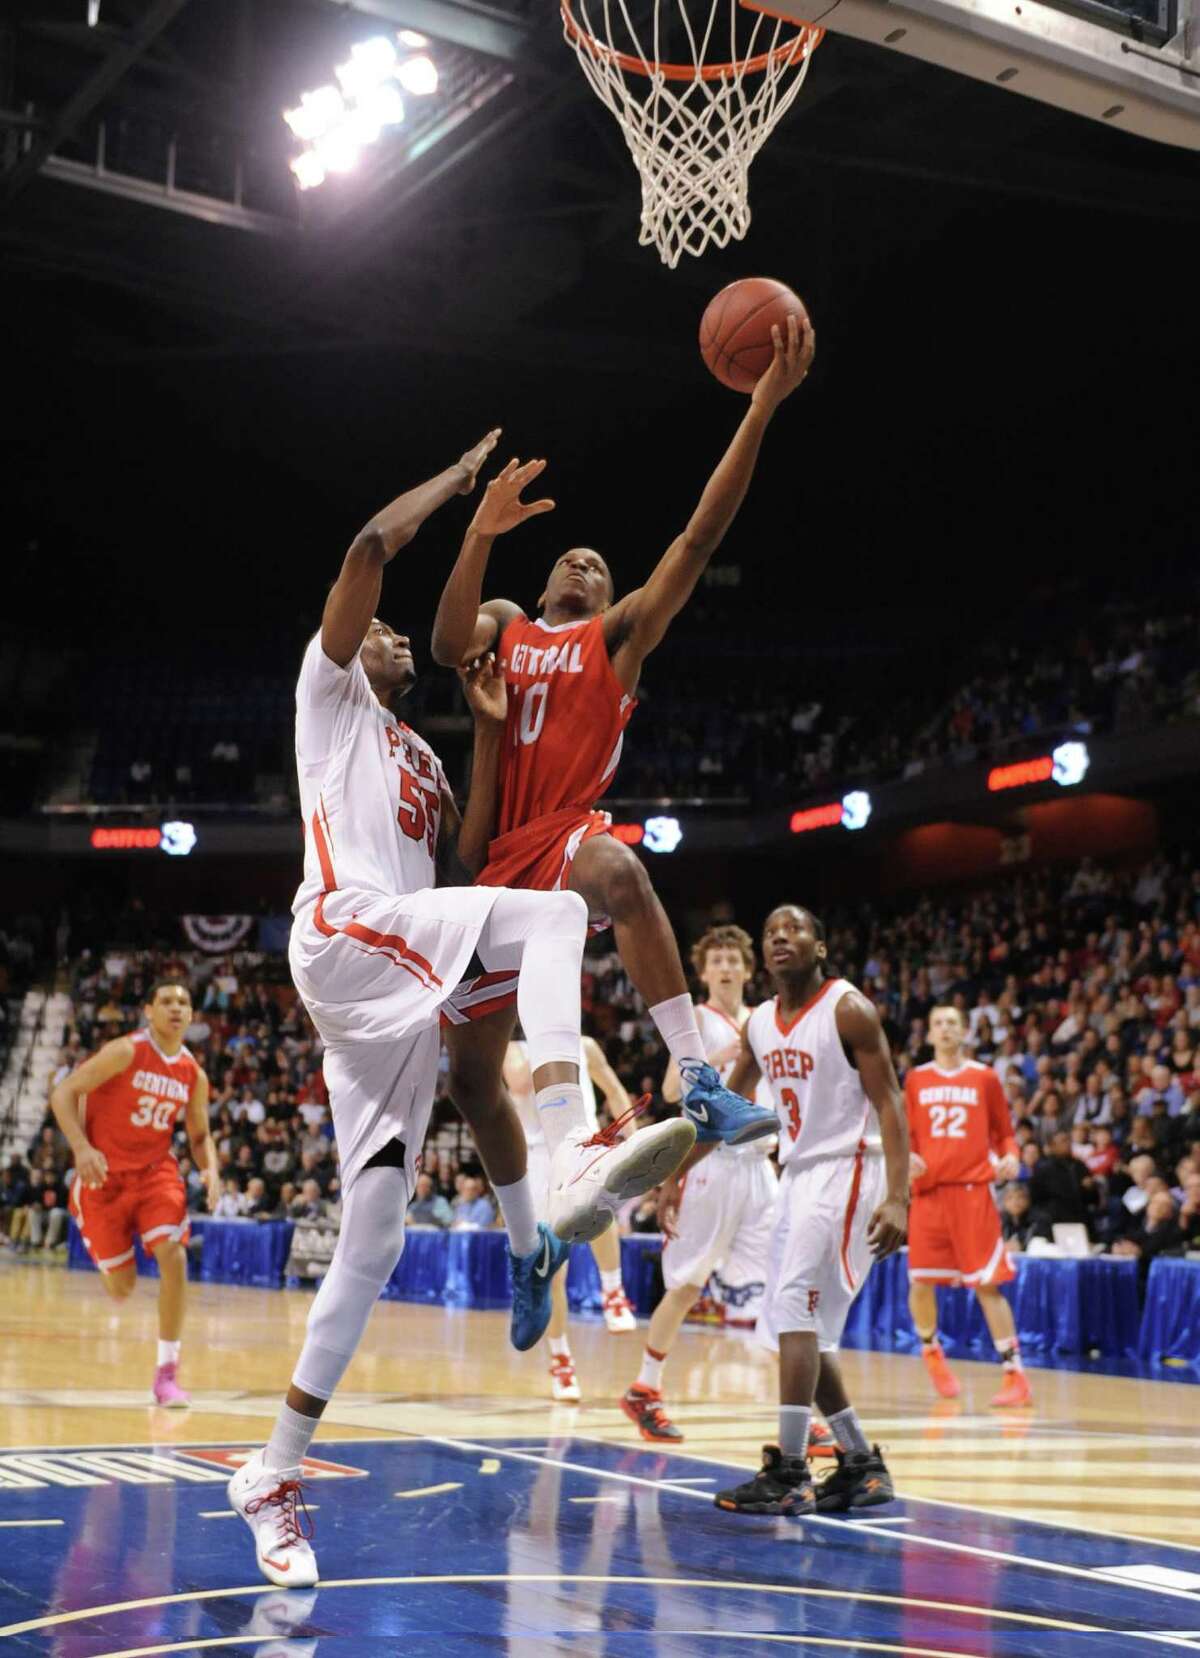 Bridgeport Central's Sha'quan Bretoux (10) attempts a layup over Fairfield Prep defender Paschal Chukwu (55) in the CIAC Class LL high school boys basketball state championship game between No. 1 Fairfield Prep. and No. 2 Bridgeport Central at Mohegan Sun Arena in Uncasville, Conn. on Saturday, March 22, 2014.